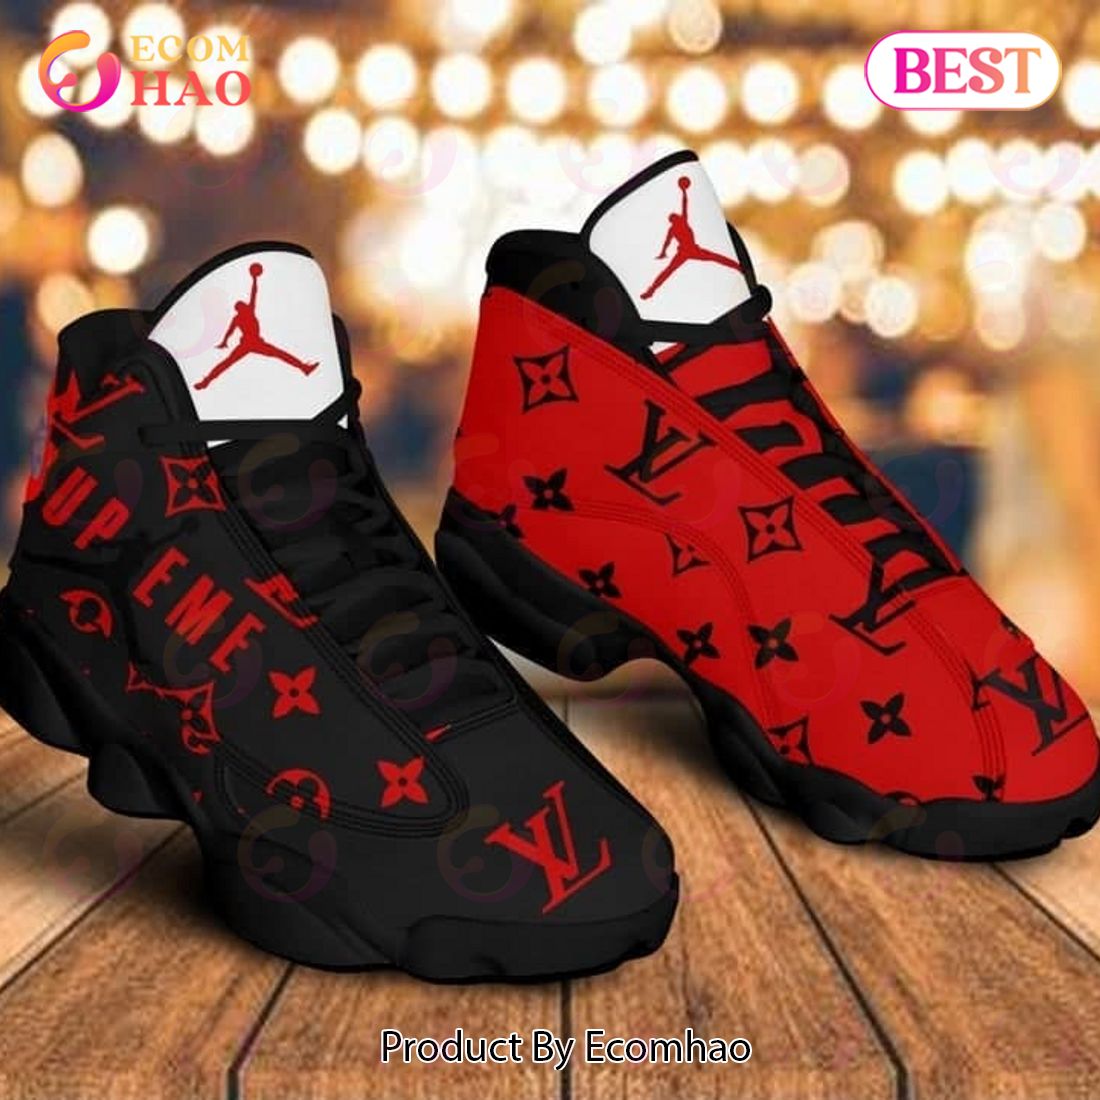 Louis Vuitton Air Jordan 13 Black And Red LV Shoes, Sneakers - Ecomhao Store